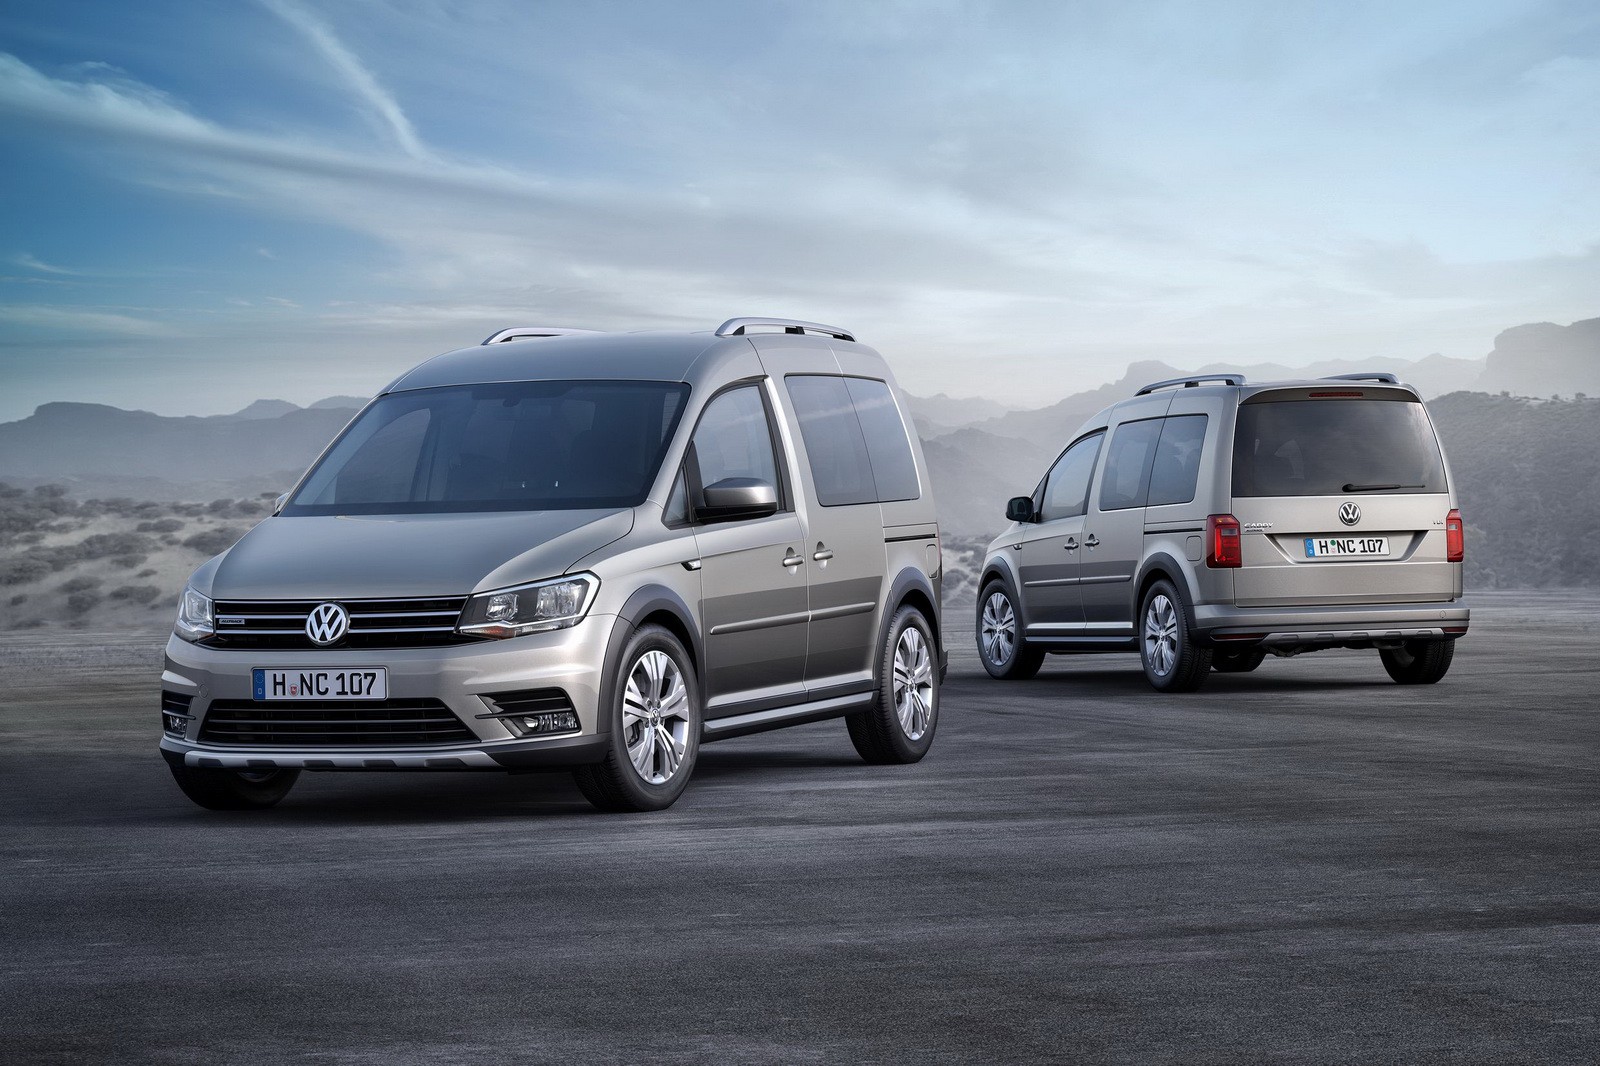 Beugel Dicteren Gastvrijheid Volkswagen Unveils All-New Caddy Alltrack with Rugged Looks and 4Motion AWD  - autoevolution